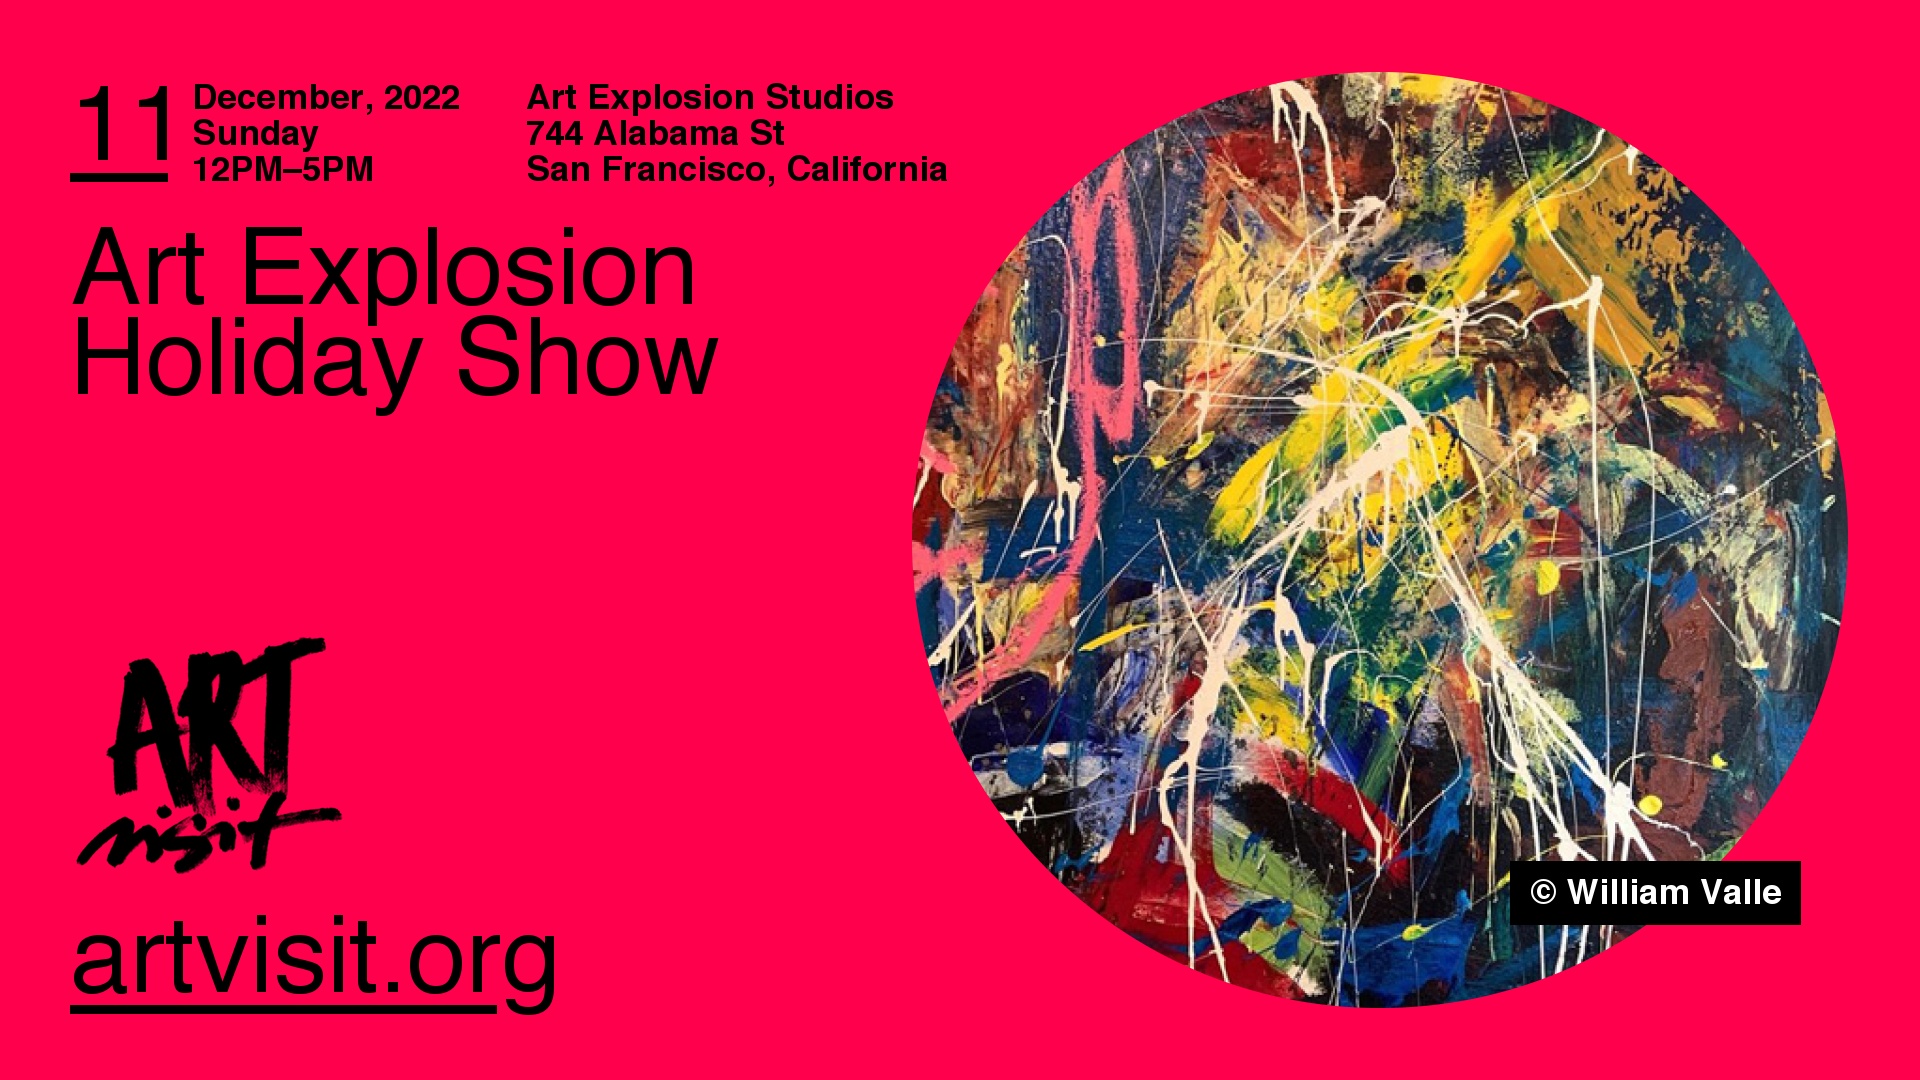 Art Explosion Holiday Show